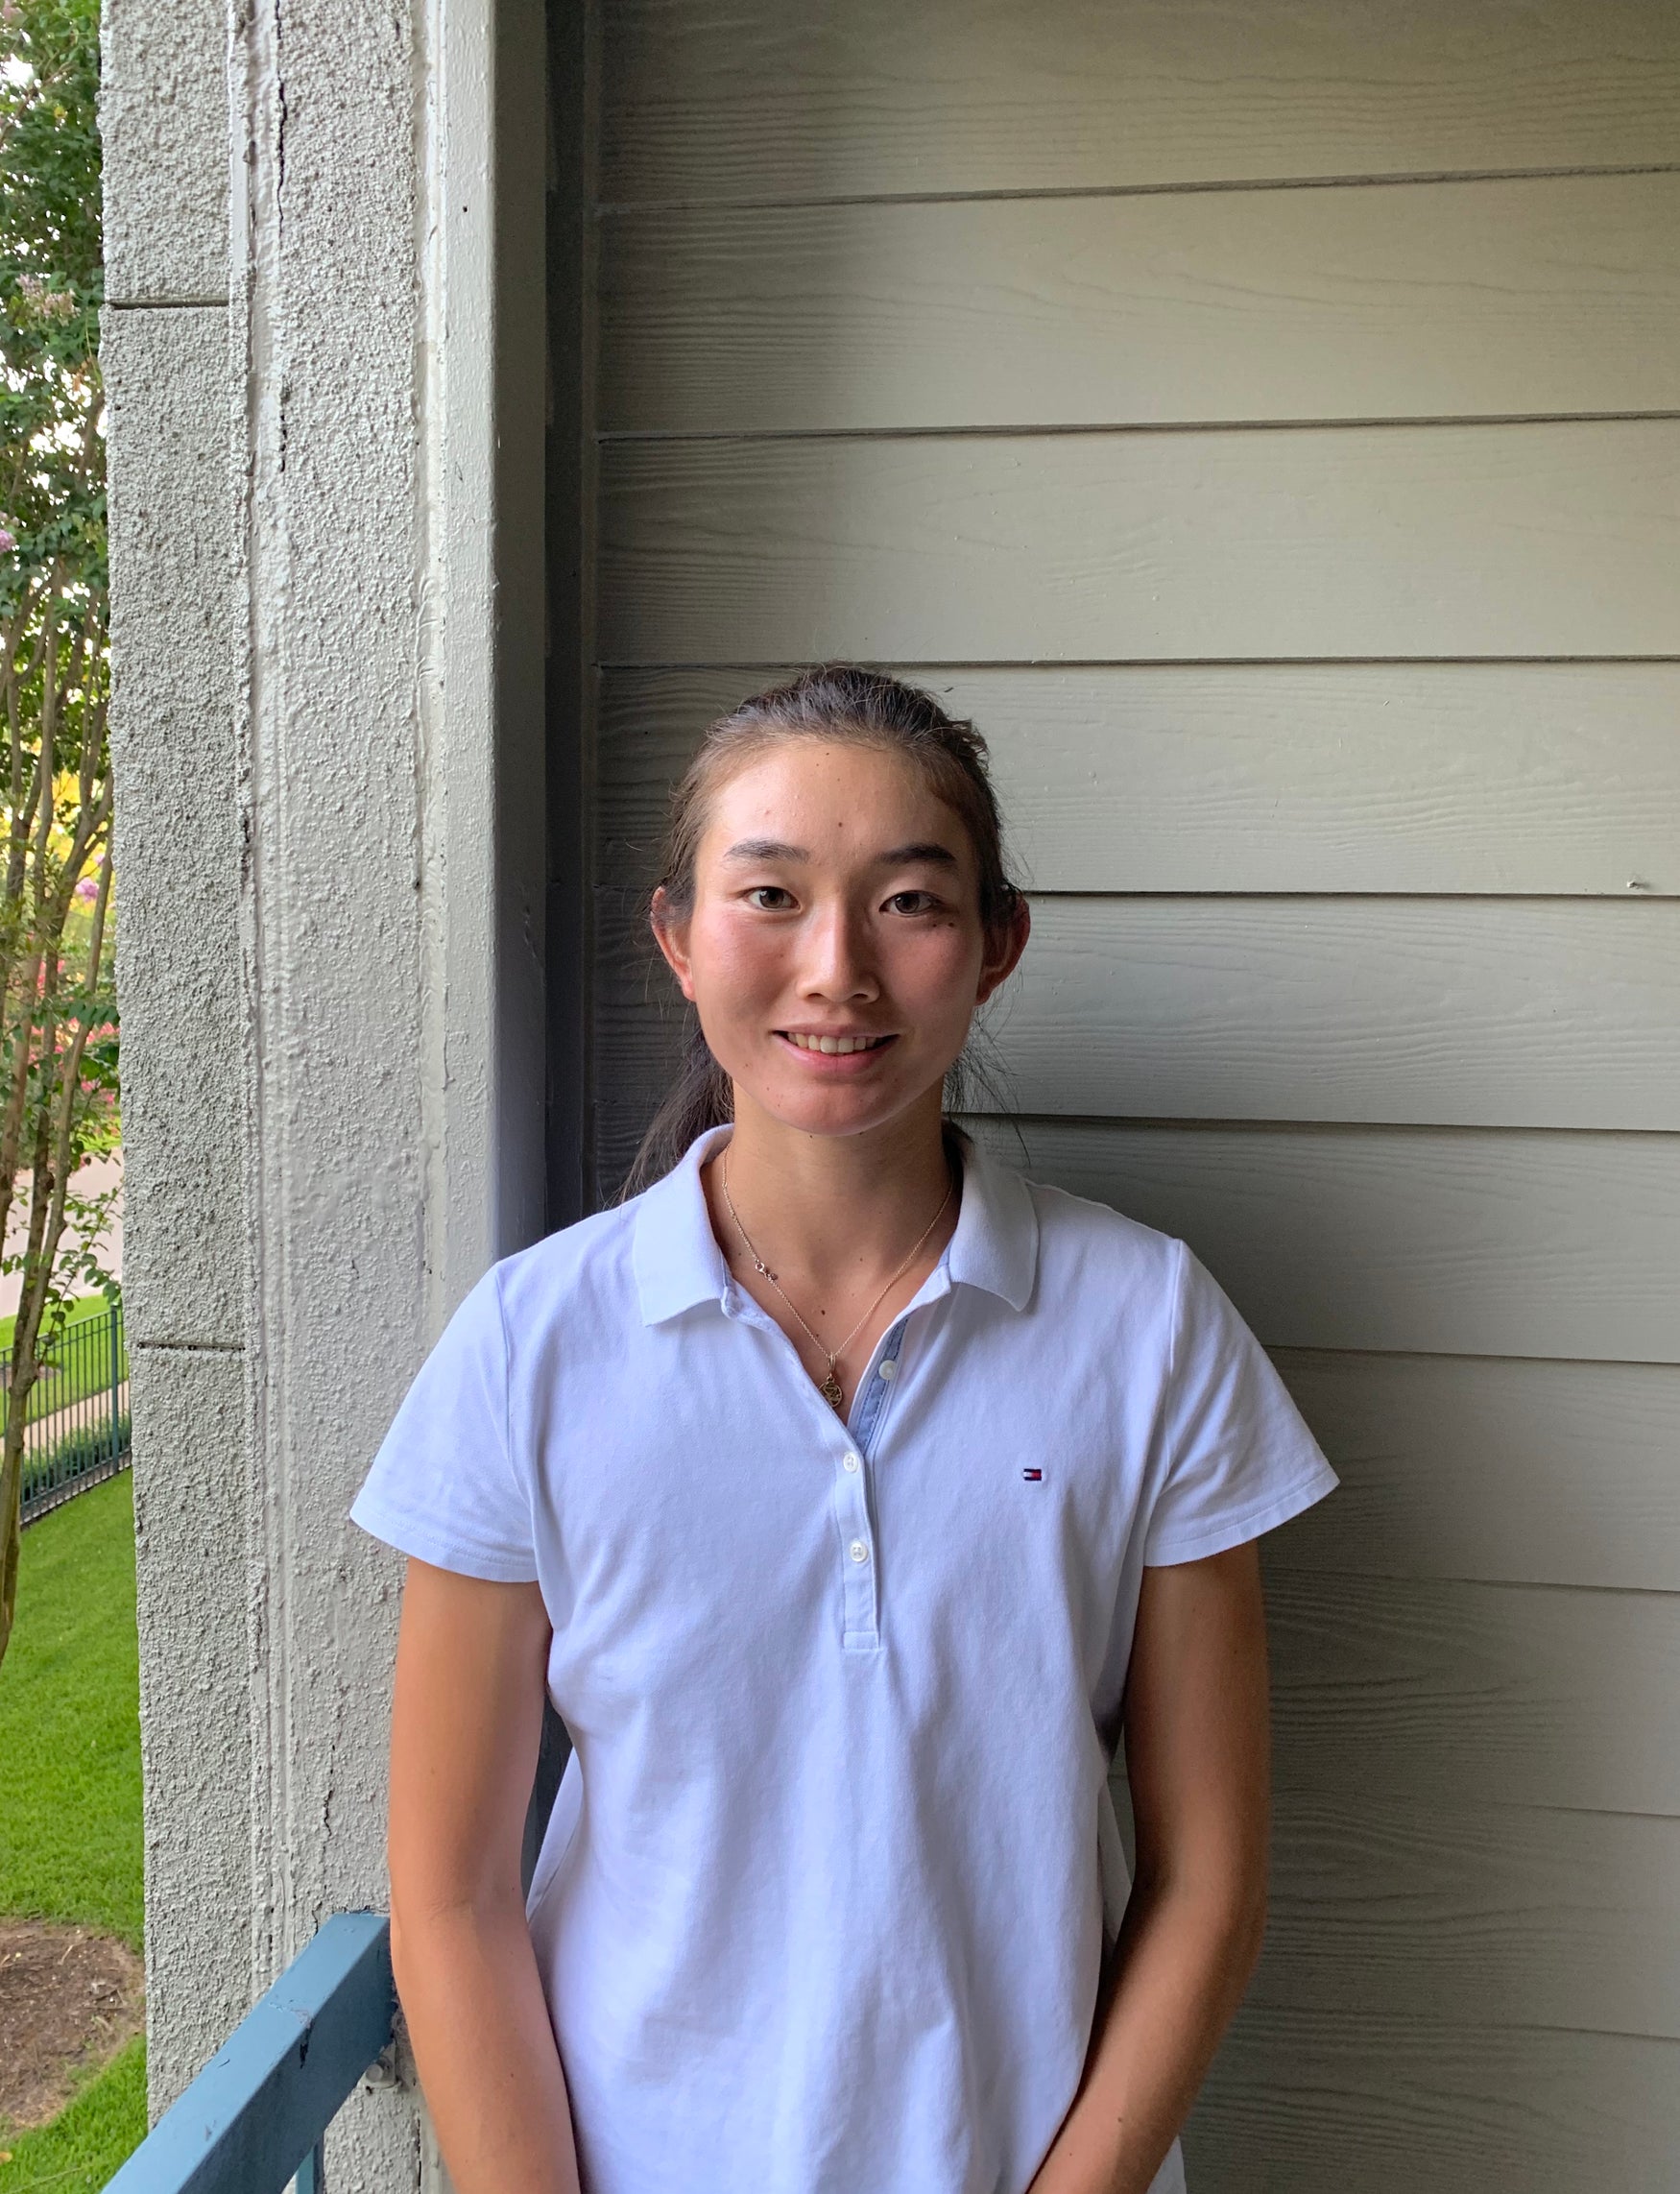 Linda Huang ‘21 interned with Star Innovations